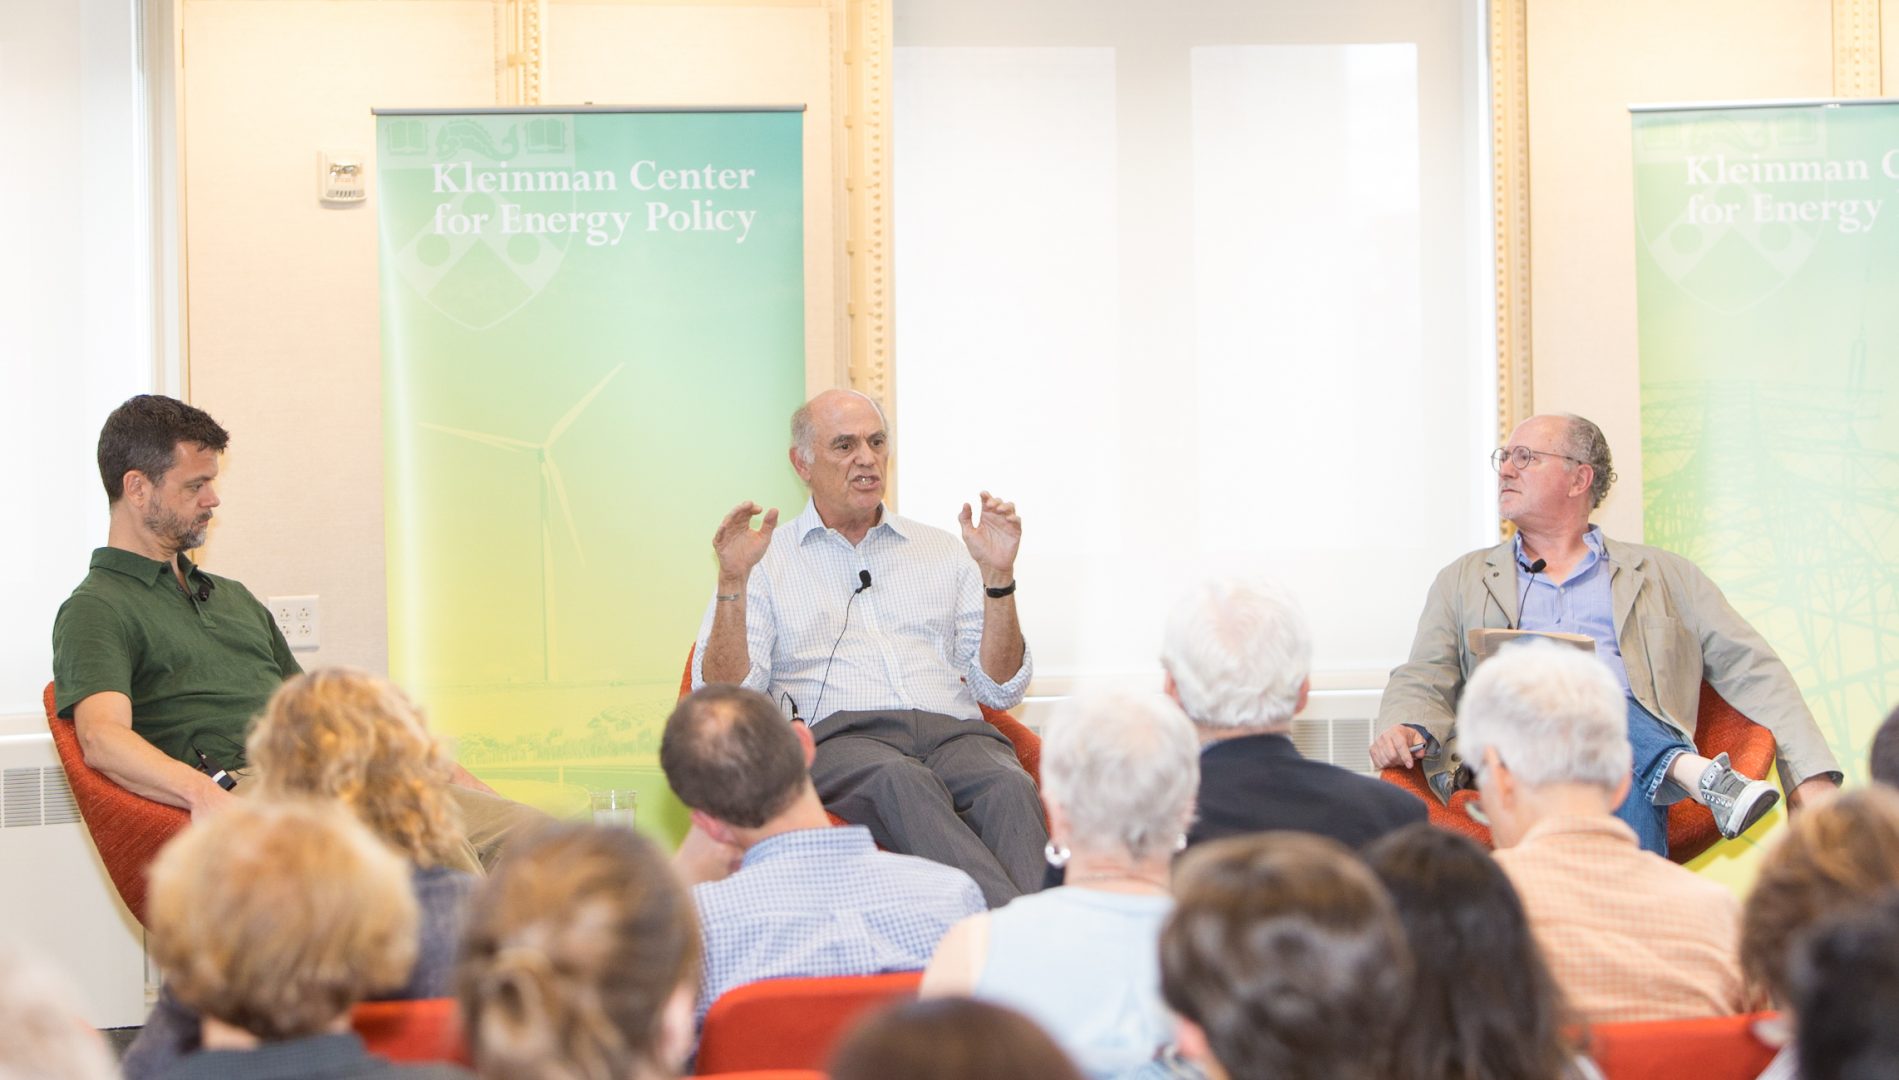 From left, David Roberts covers energy and climate change for Vox; Rafe Pomerance, chairman of Arctic 21, a network of organizations focused on communicating the unraveling of the Arctic as a result of climate change to policy makers and the public; and moderator Mark Hughes, founding faculty director of the Kleinman Center for Energy Policy at the center's event, 